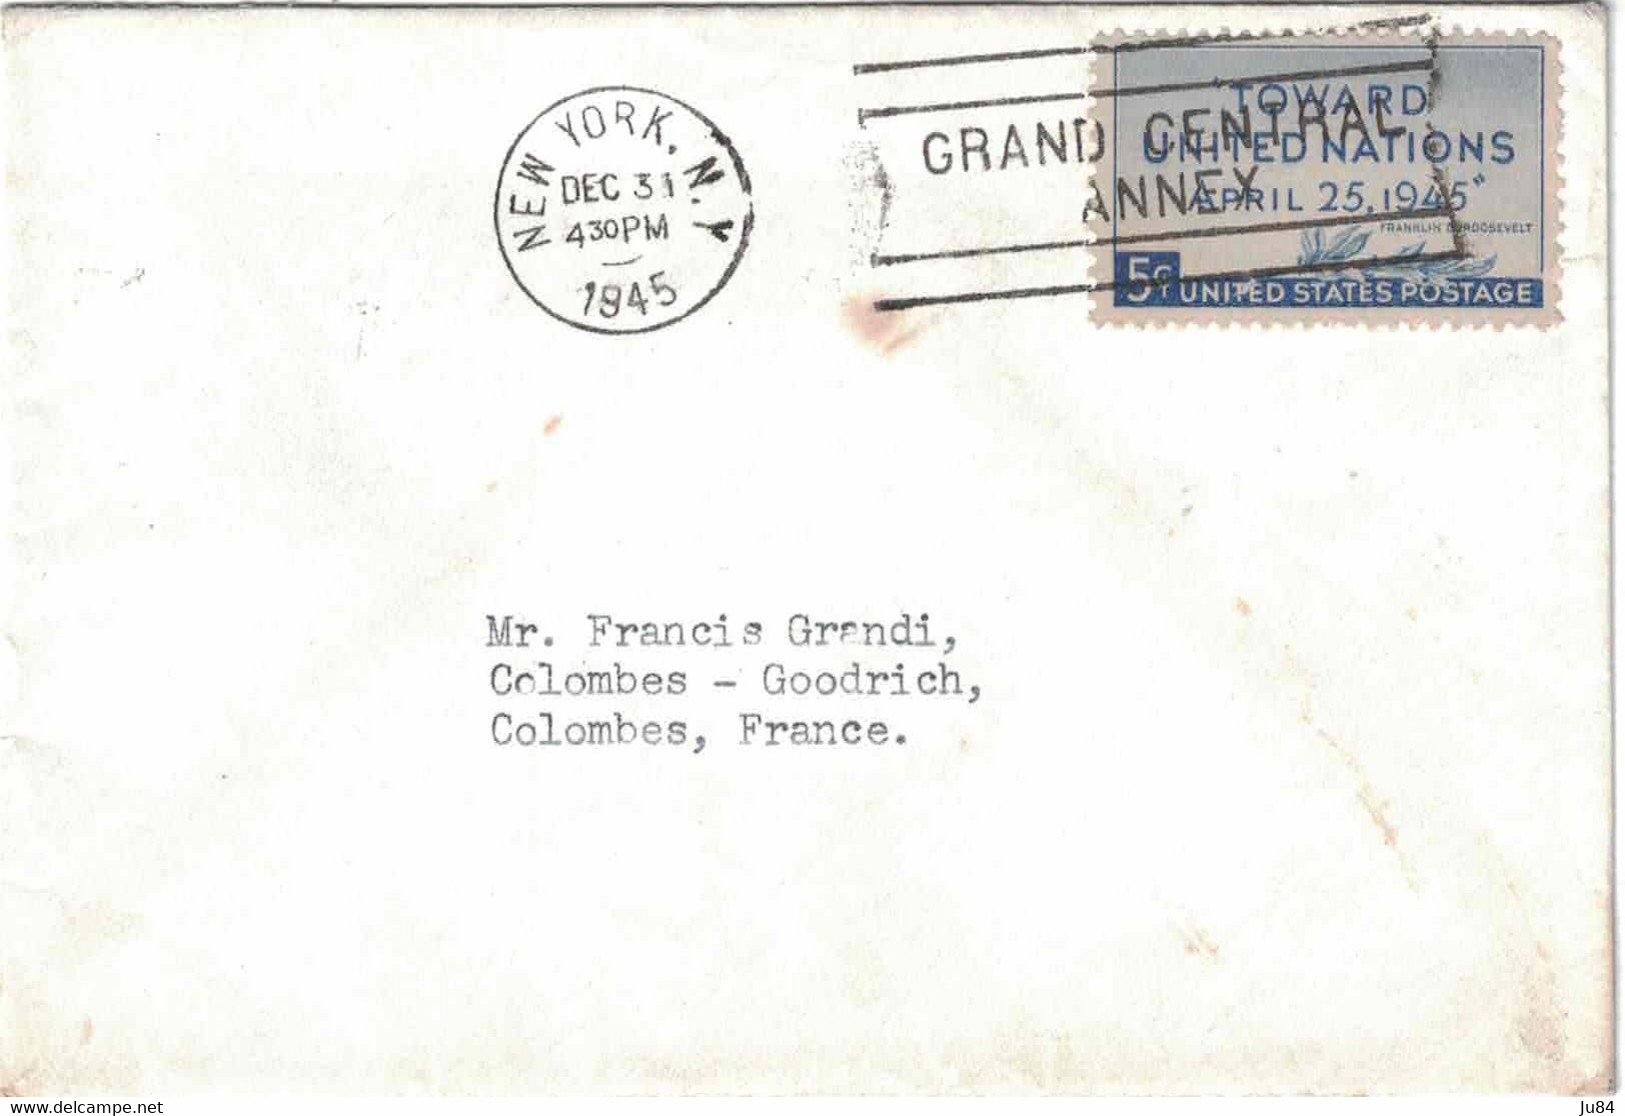 New York - Lettre Pour Colombes - France - Grand Central Annex - 31 Décembre 1945 - Used Stamps